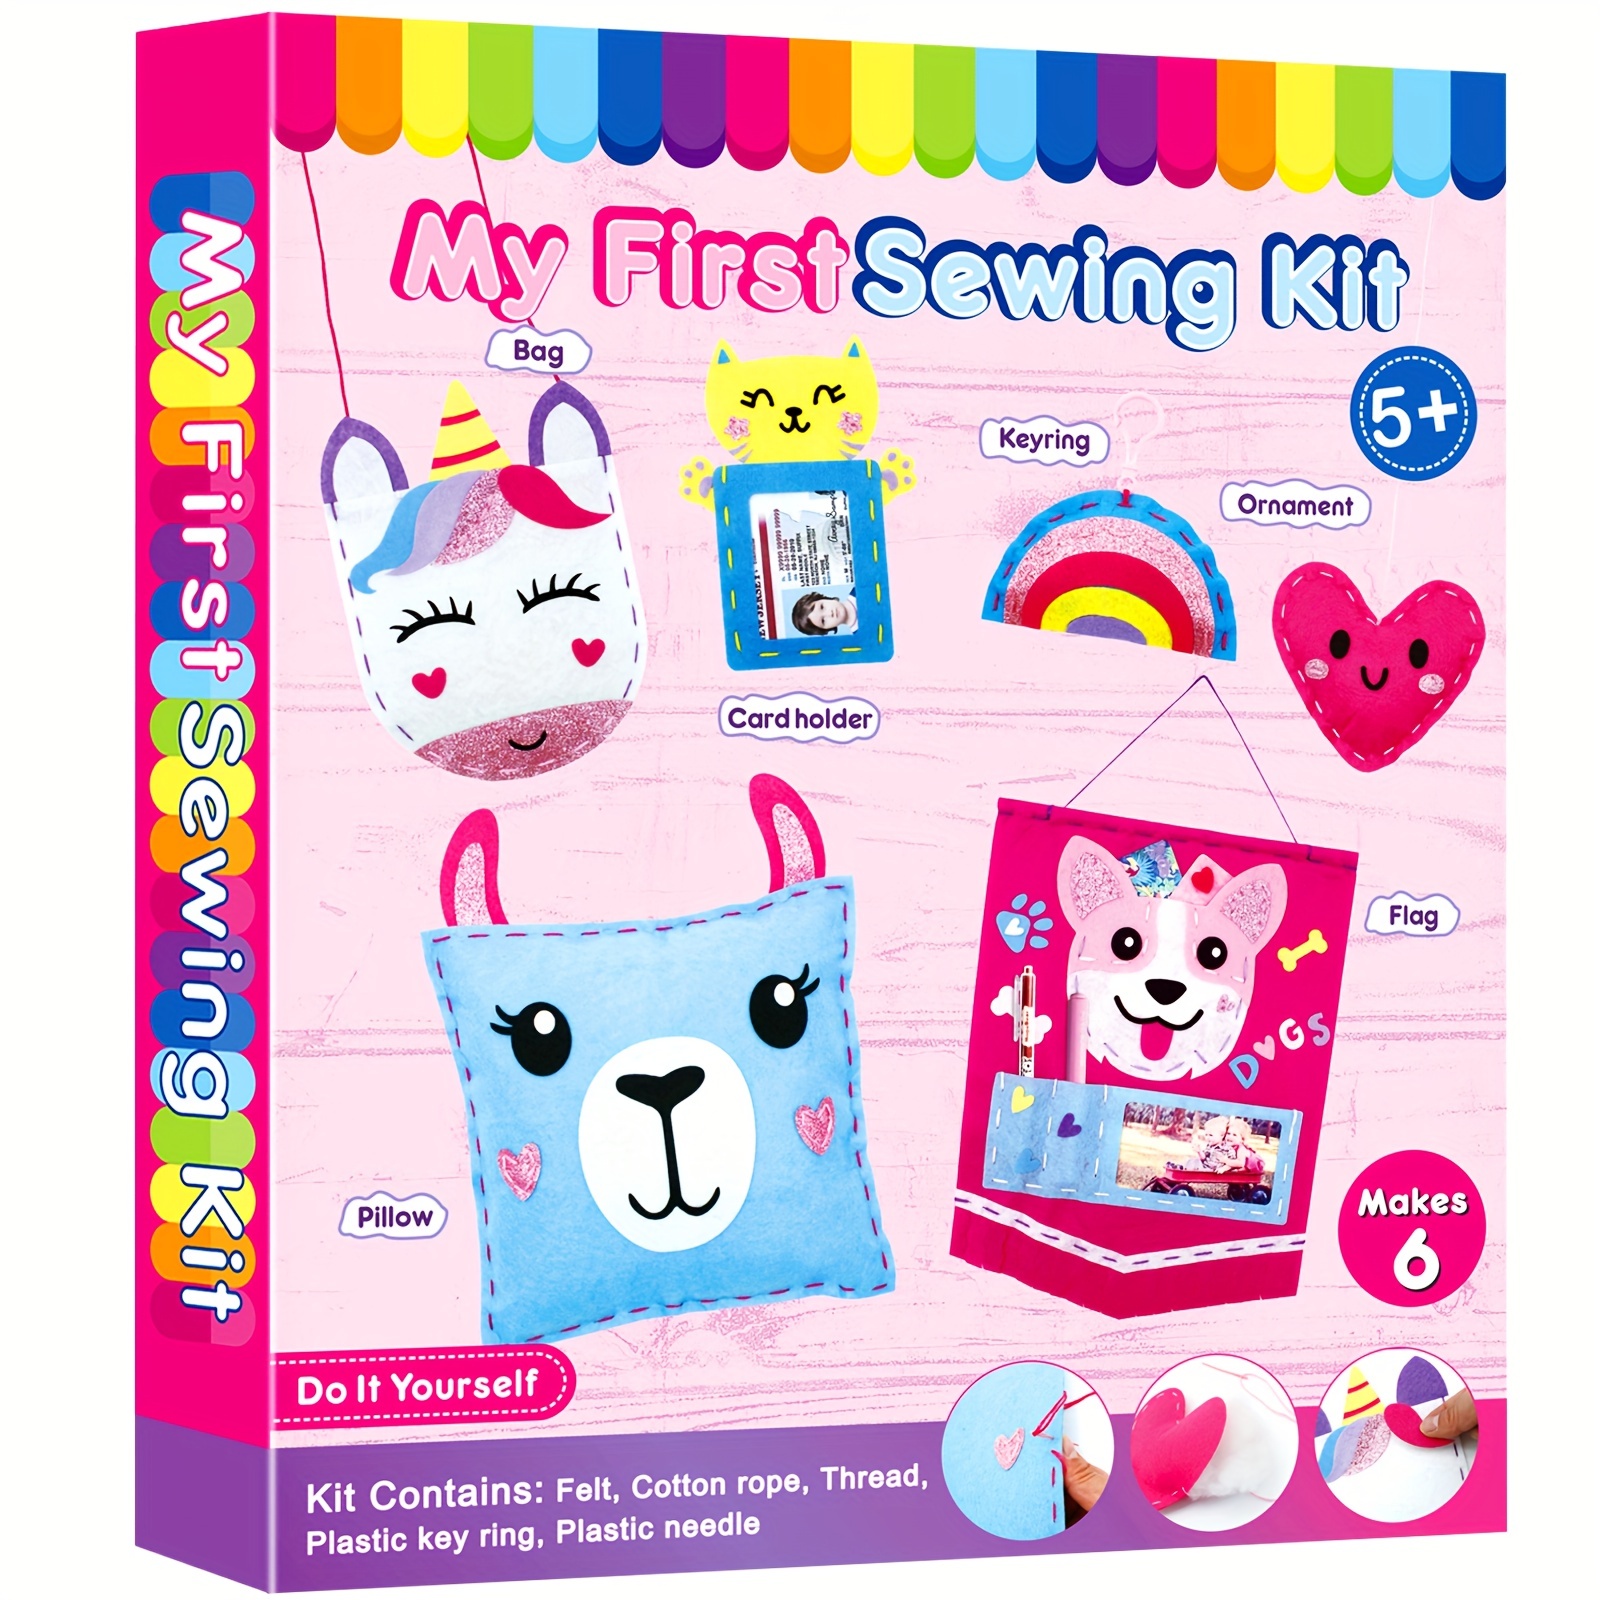 Arts and Crafts for Kids Ages 8-12, Create Your Own Plush Toys, Kit Includes All Supplies and Instructions, Best Craft Project for Girls & Boys Ages